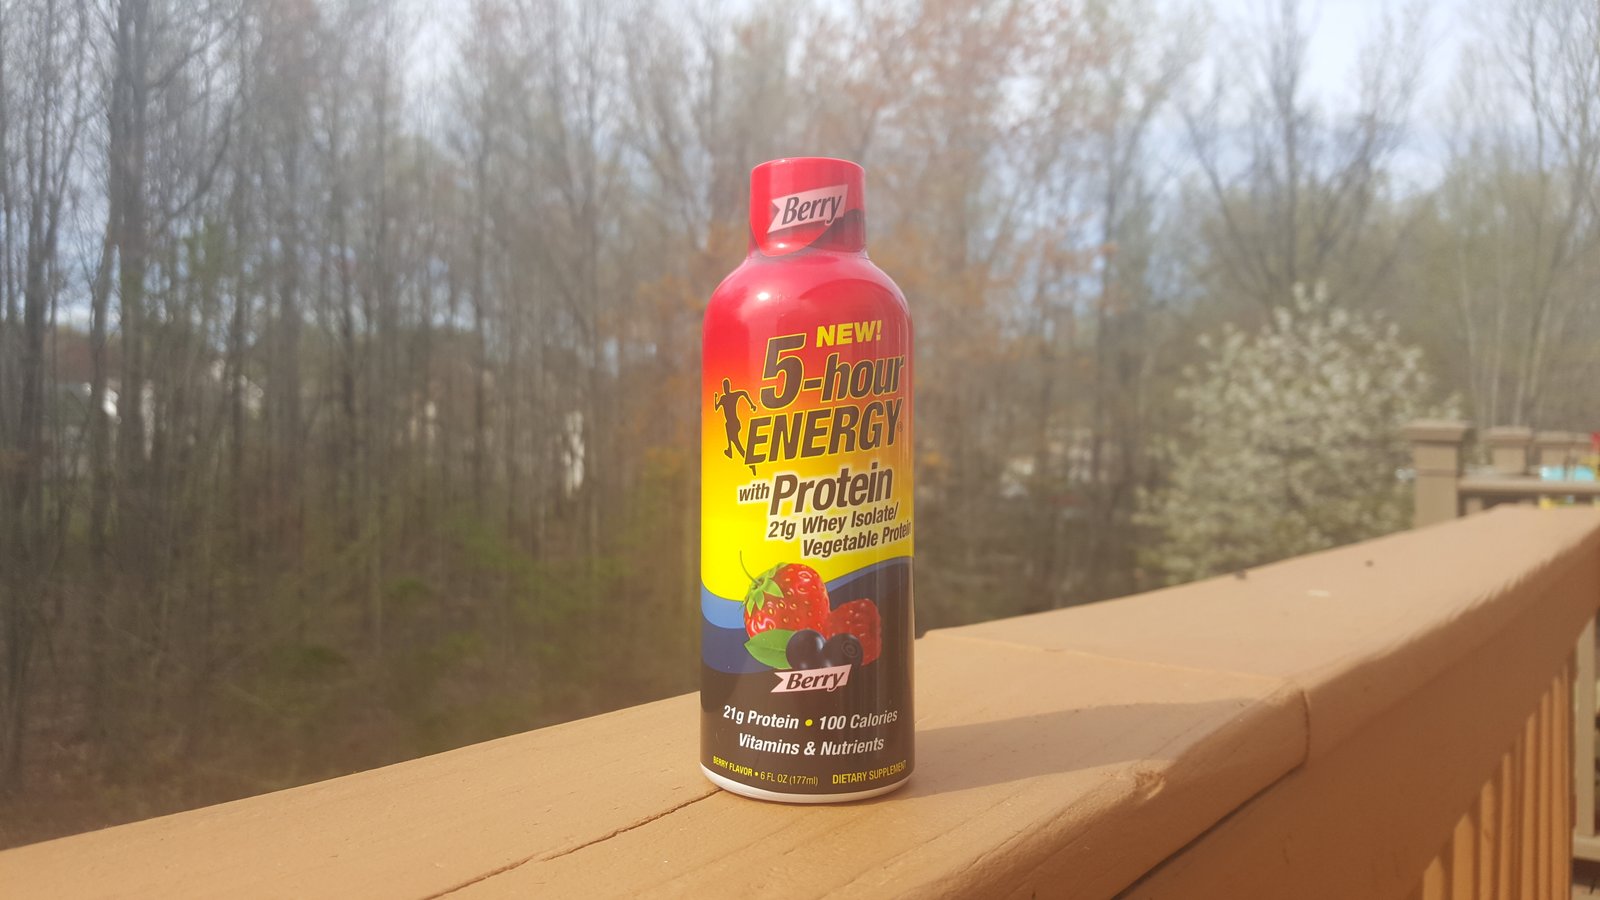 5-hour-energy-protein-review